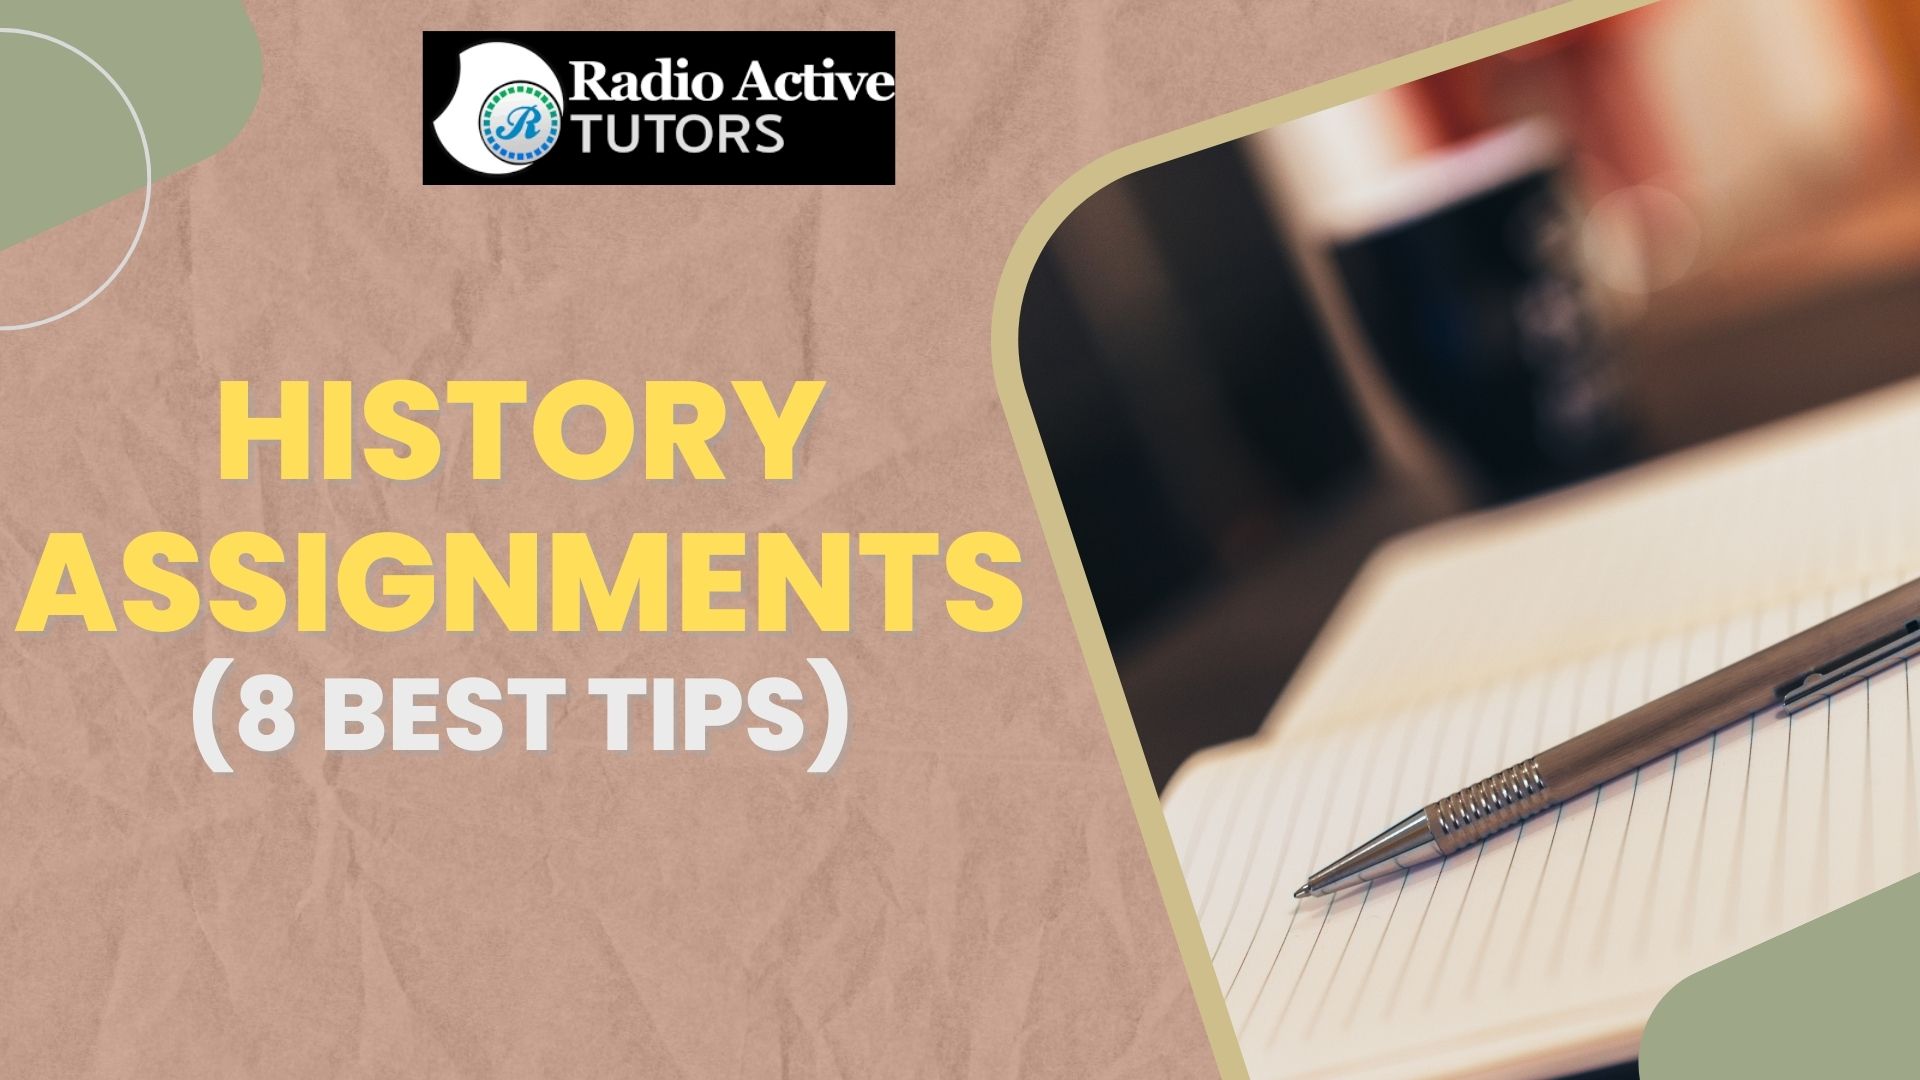 History Assignments (8 Best Tips)